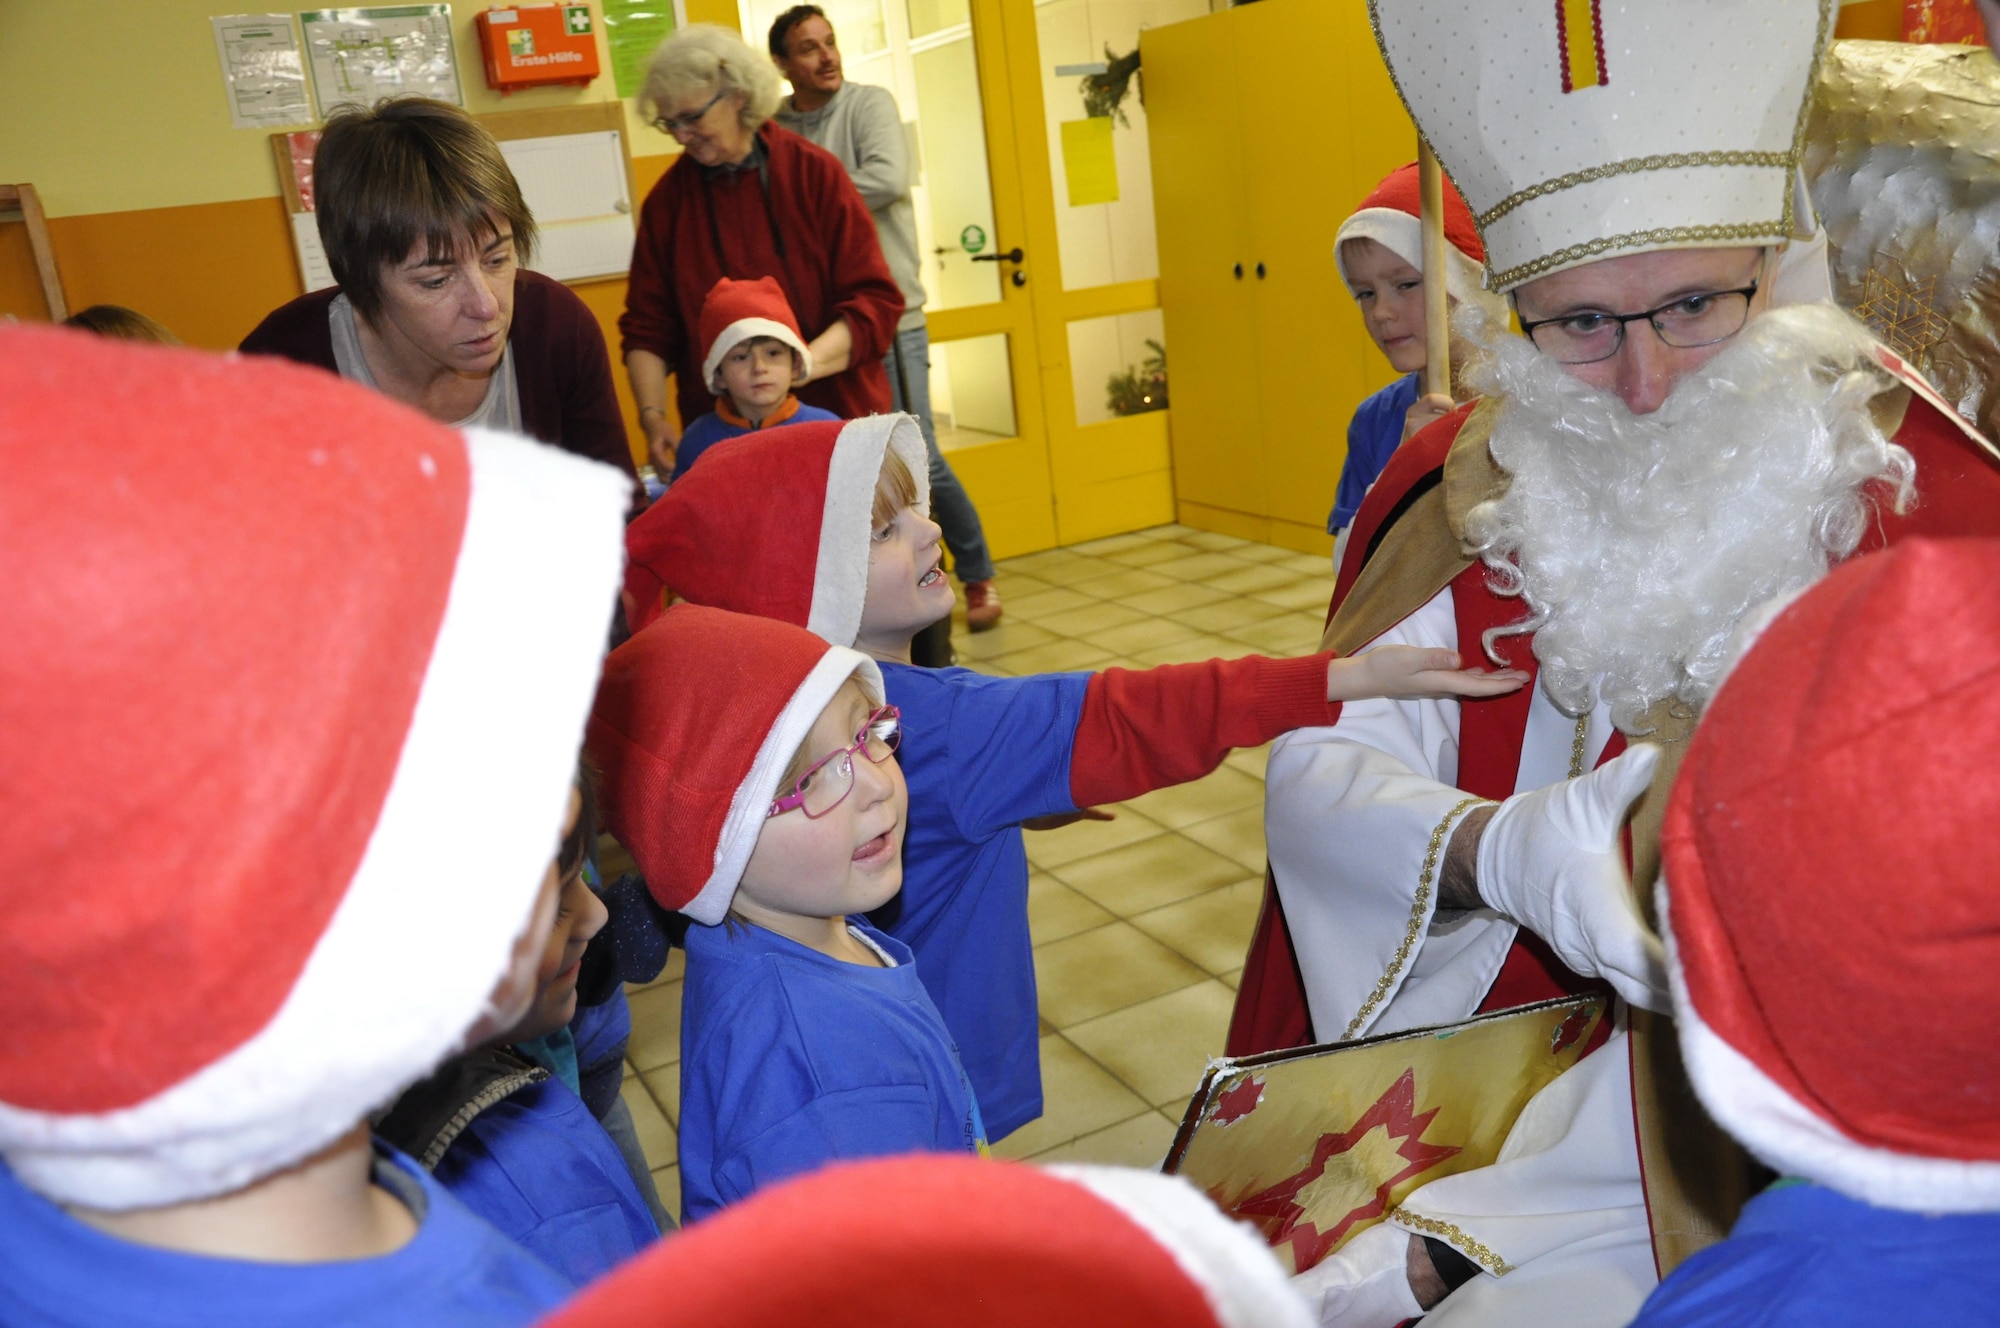 Saint Nicholas shakes hands and discusses the good things of the year with kindergarten children of the Bitburg Saint Martin school during the school’s annual Saint Nicholas celebration, Dec. 5 in Bitburg. The event included a visit by Saint Nicholas, dances and singing performances by the children, as well as a gift presentation by the 52nd Fighter Wing. The celebration was attended by Saint Martin school officials, parents, 52nd Fighter Wing leadership spouses, as well as Airmen and civilians from the wing, who provided gifts to students and kindergarten children. In the summer,  Spangdahlem Sabers invited the Saint Martin school to Special Children’s Day at Spangdahlem AB, where they played games and spent a fun-filled time together. (U.S. Air Force photo by Iris Reiff)